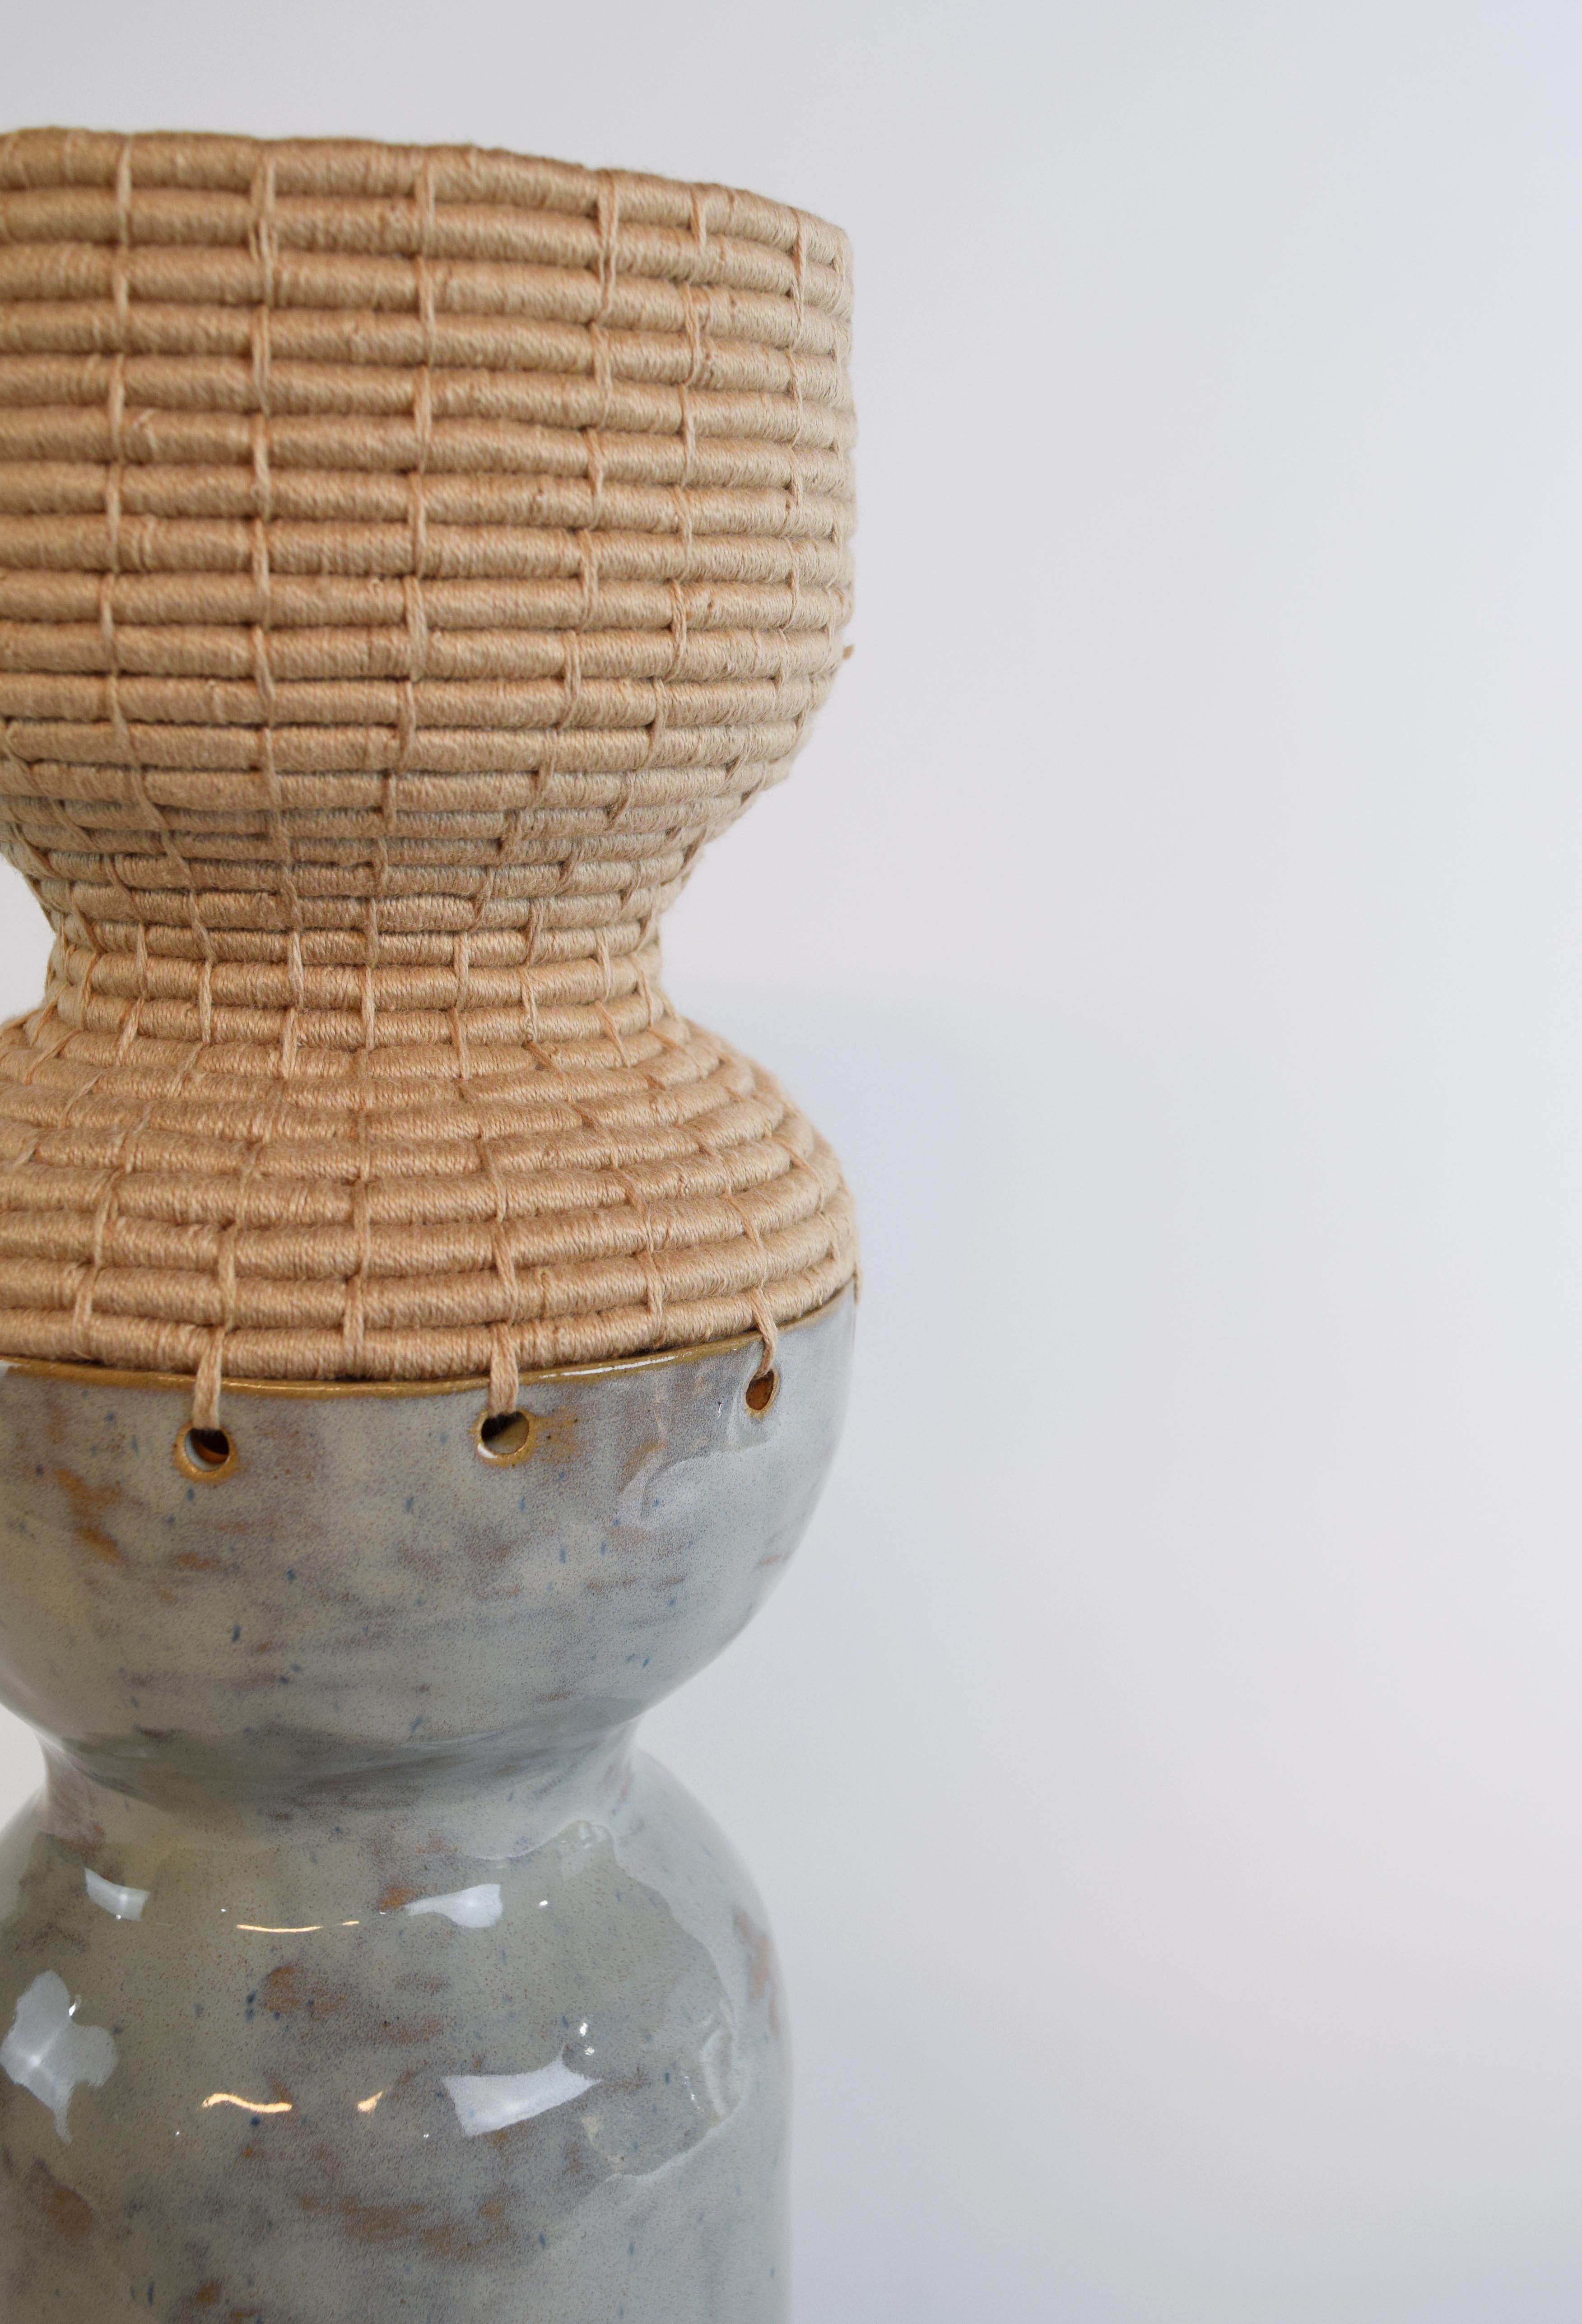 Organic Modern One of a Kind Ceramic and Woven Cotton Vessel #753, Blue Glaze & Tan Weaving